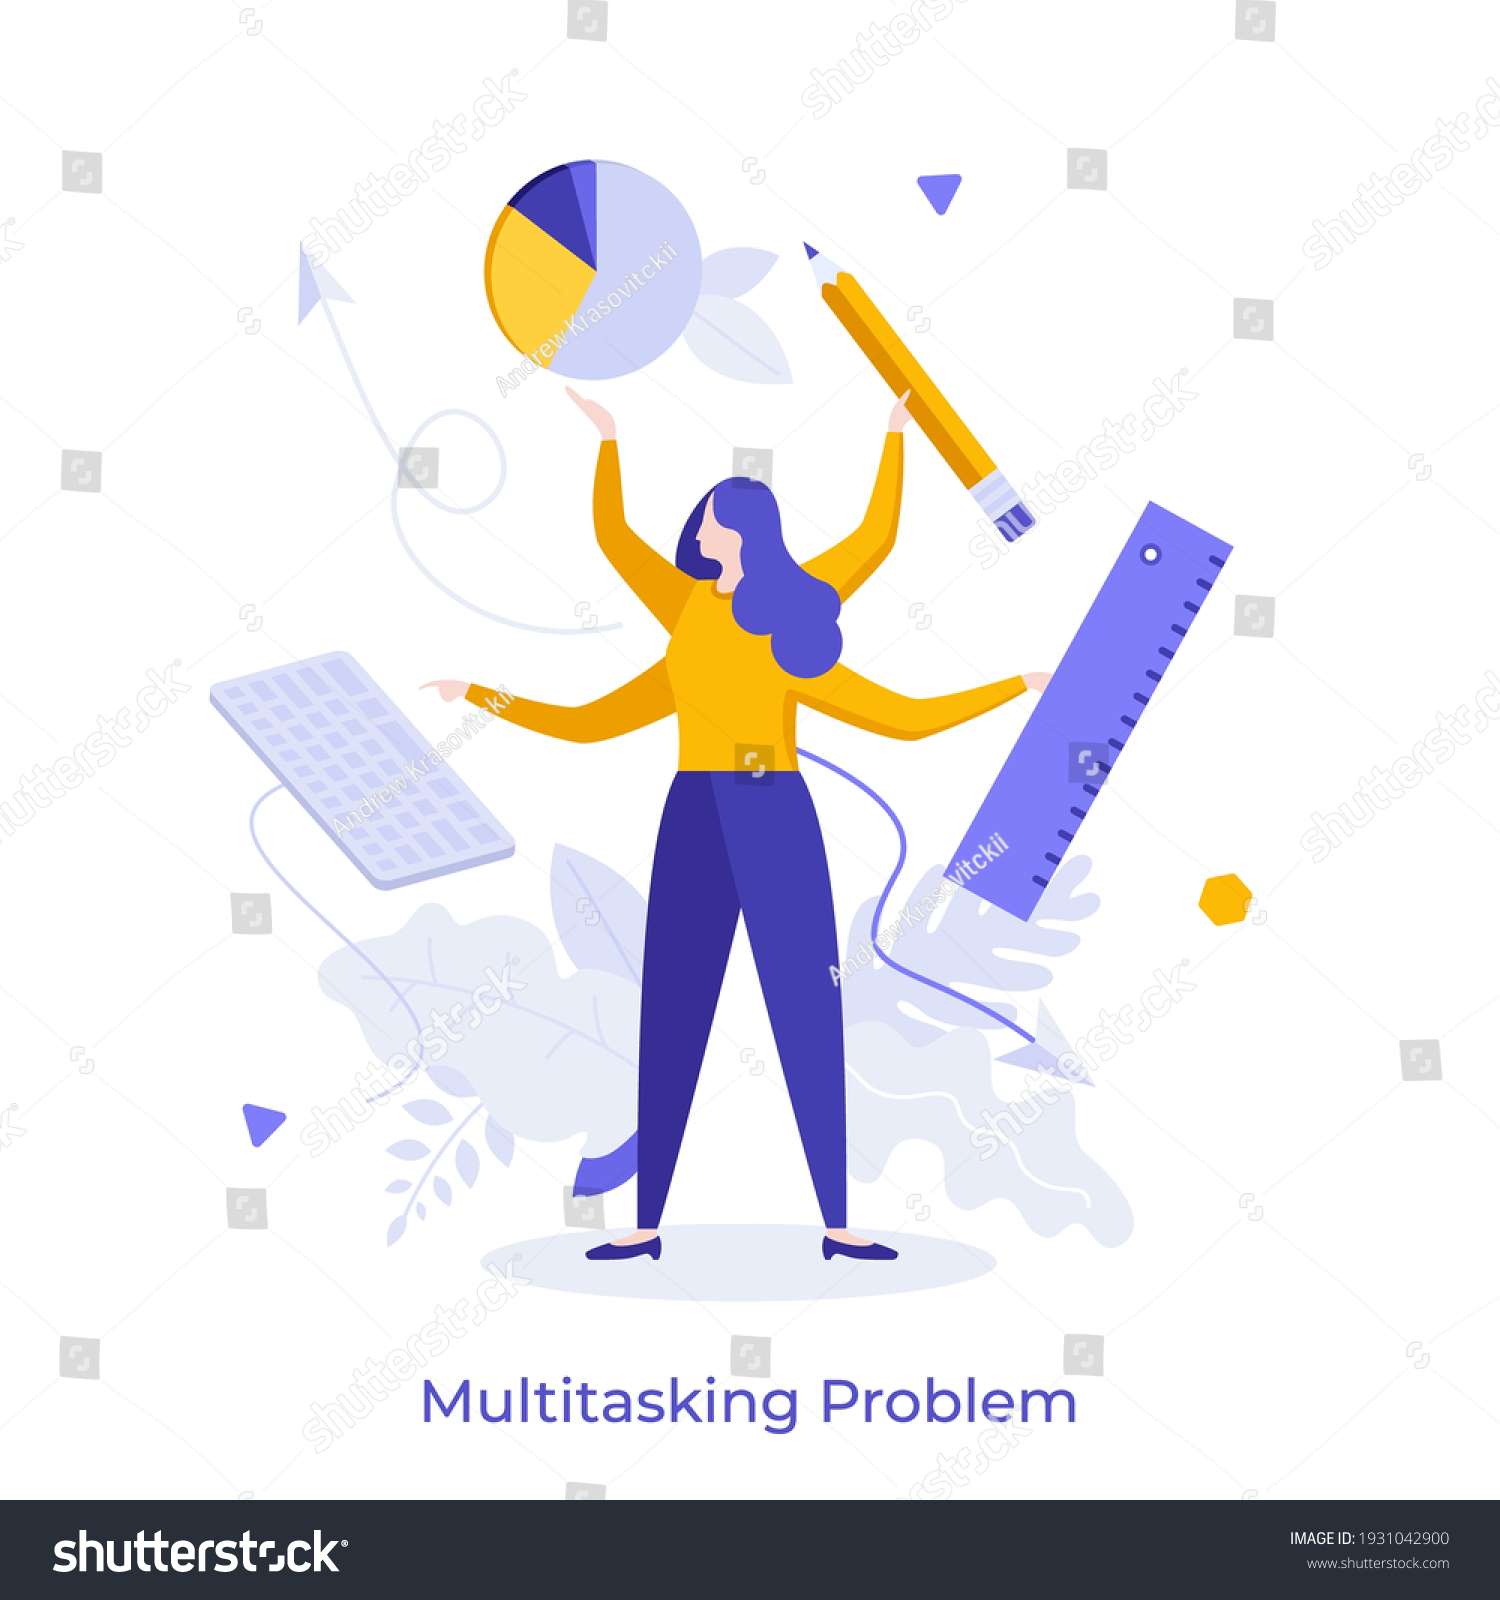 Woman with four hands holding keyboard, diagram, pencil, ruler. Concept of multitasking problem, switching between tasks, work organization, time management. Modern flat colorful vector illustration. #1931042900